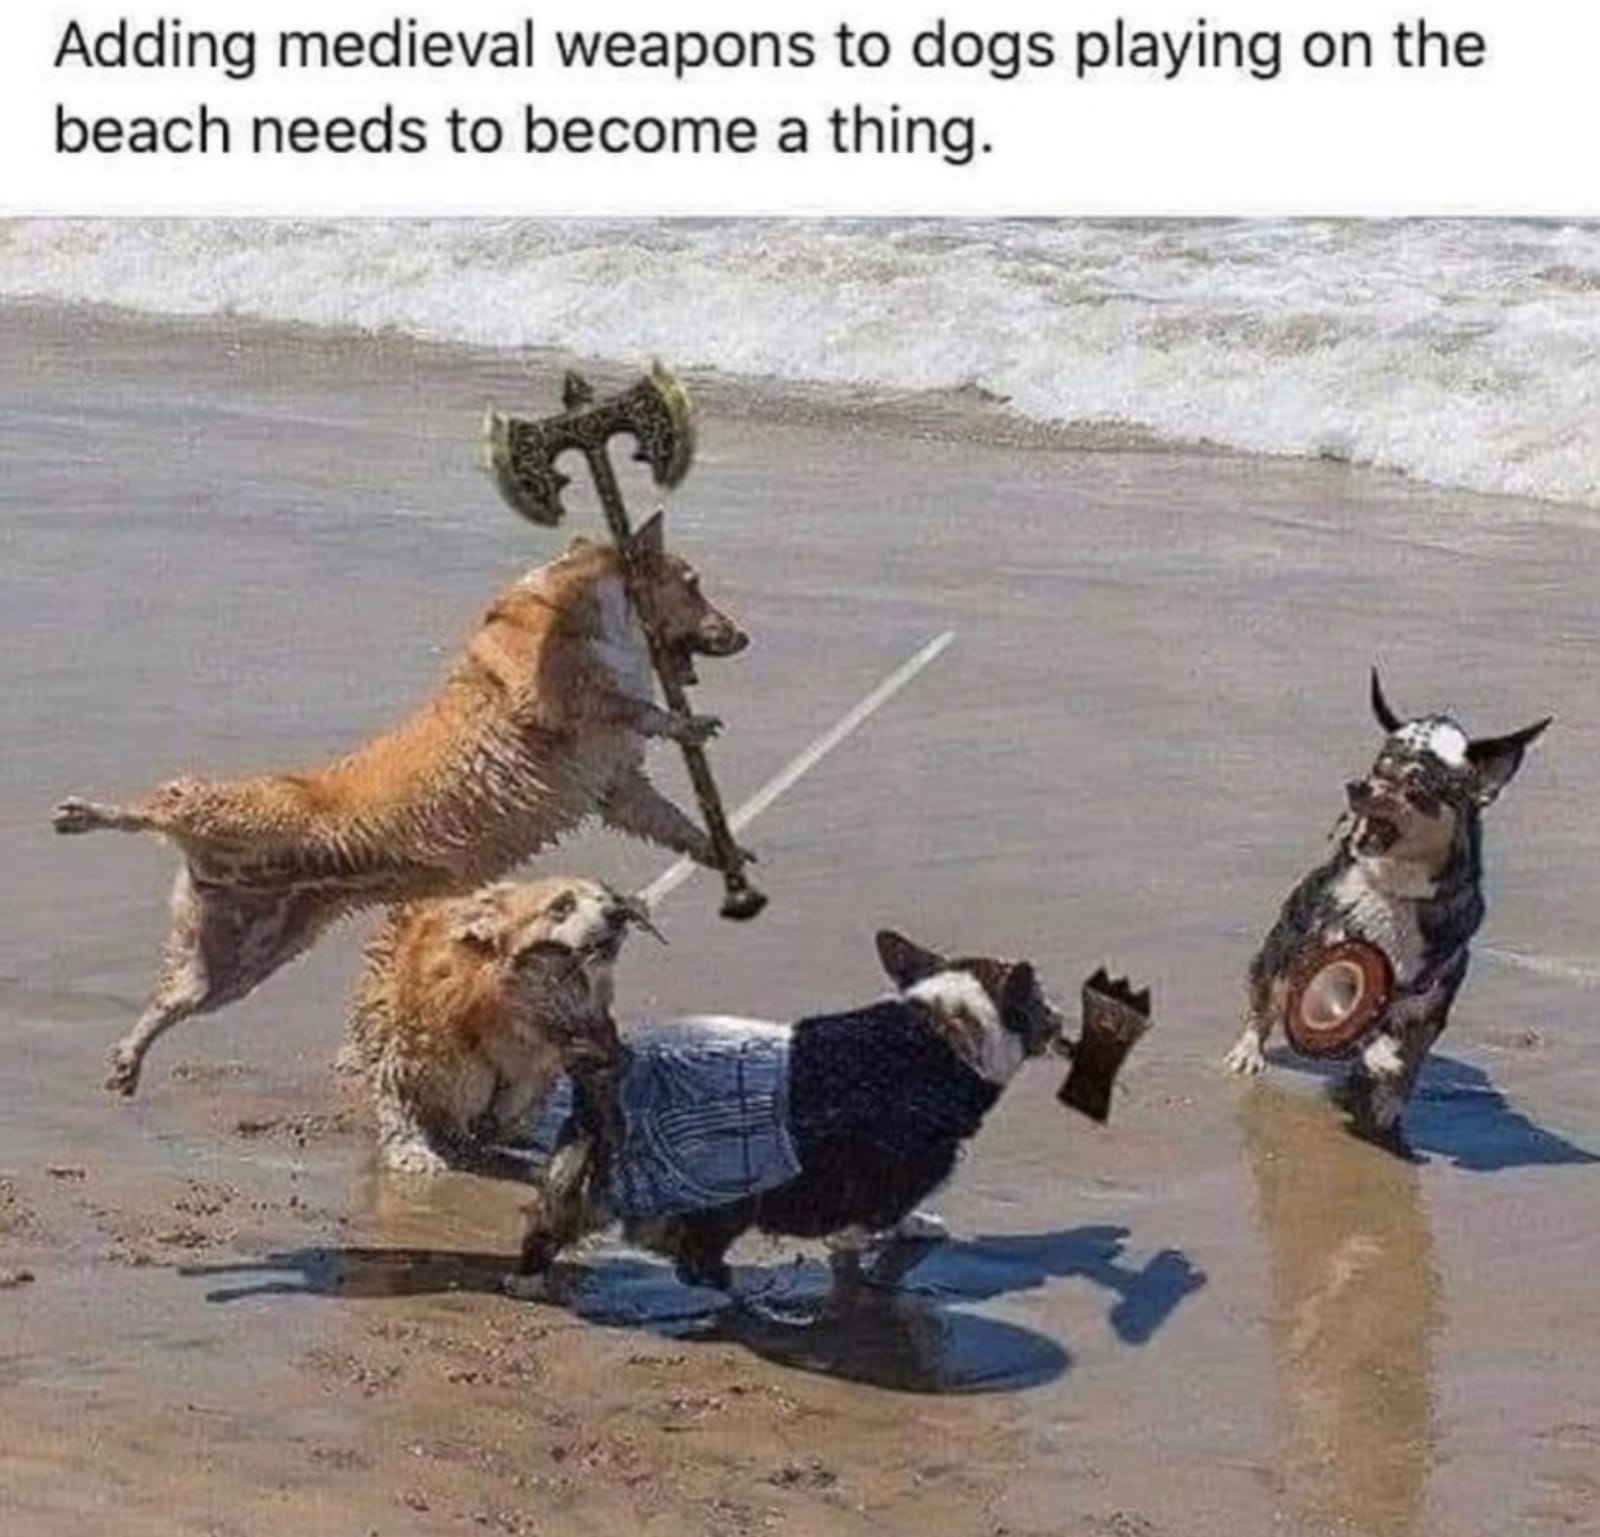 Medieval weapons to dogs playing on the beach